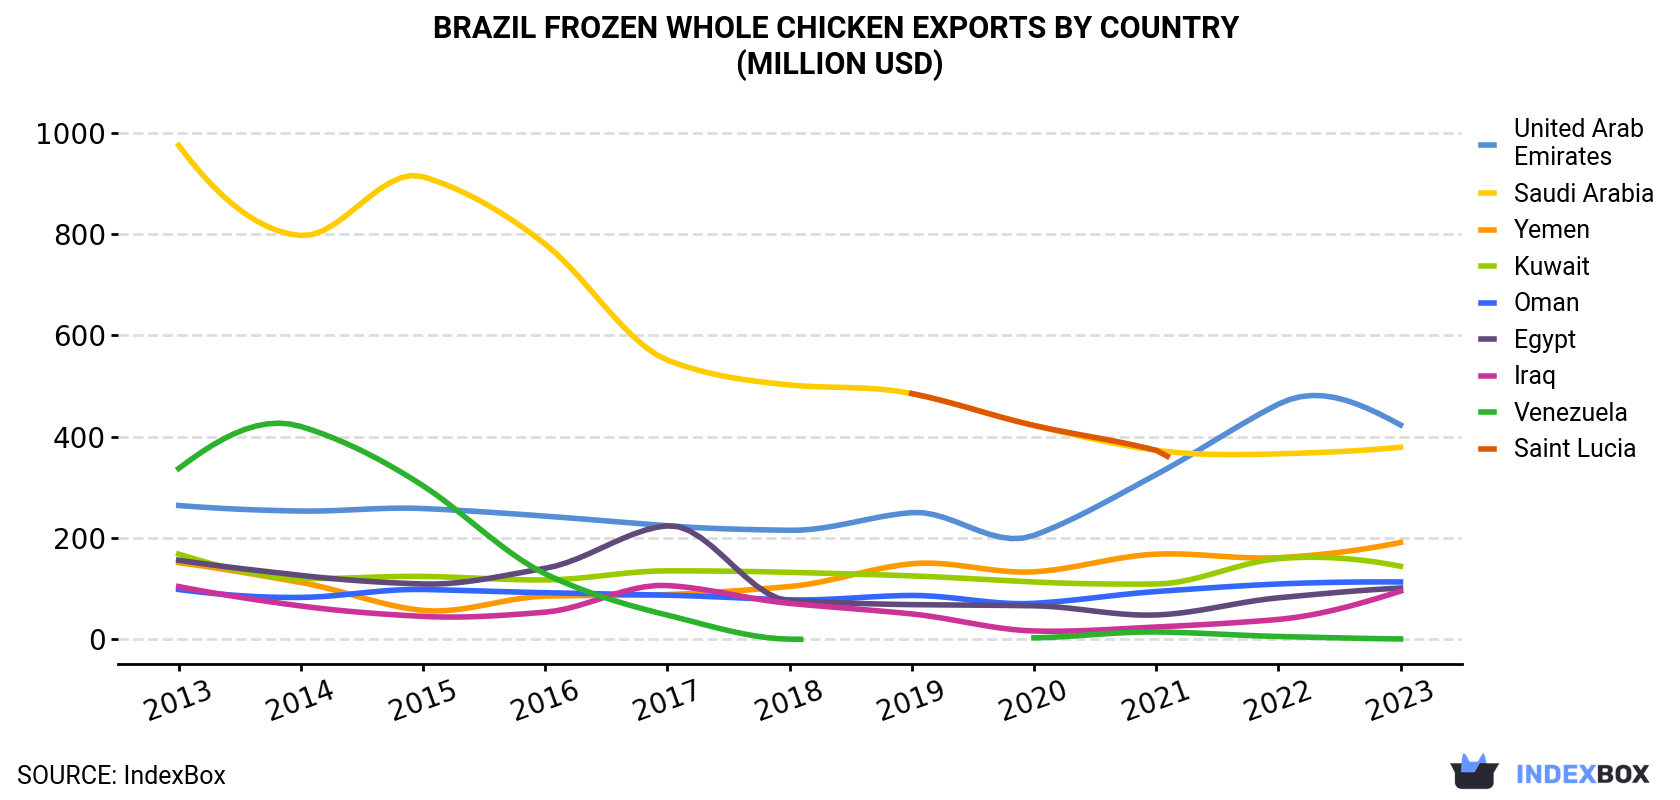 Brazil Frozen Whole Chicken Exports By Country (Million USD)